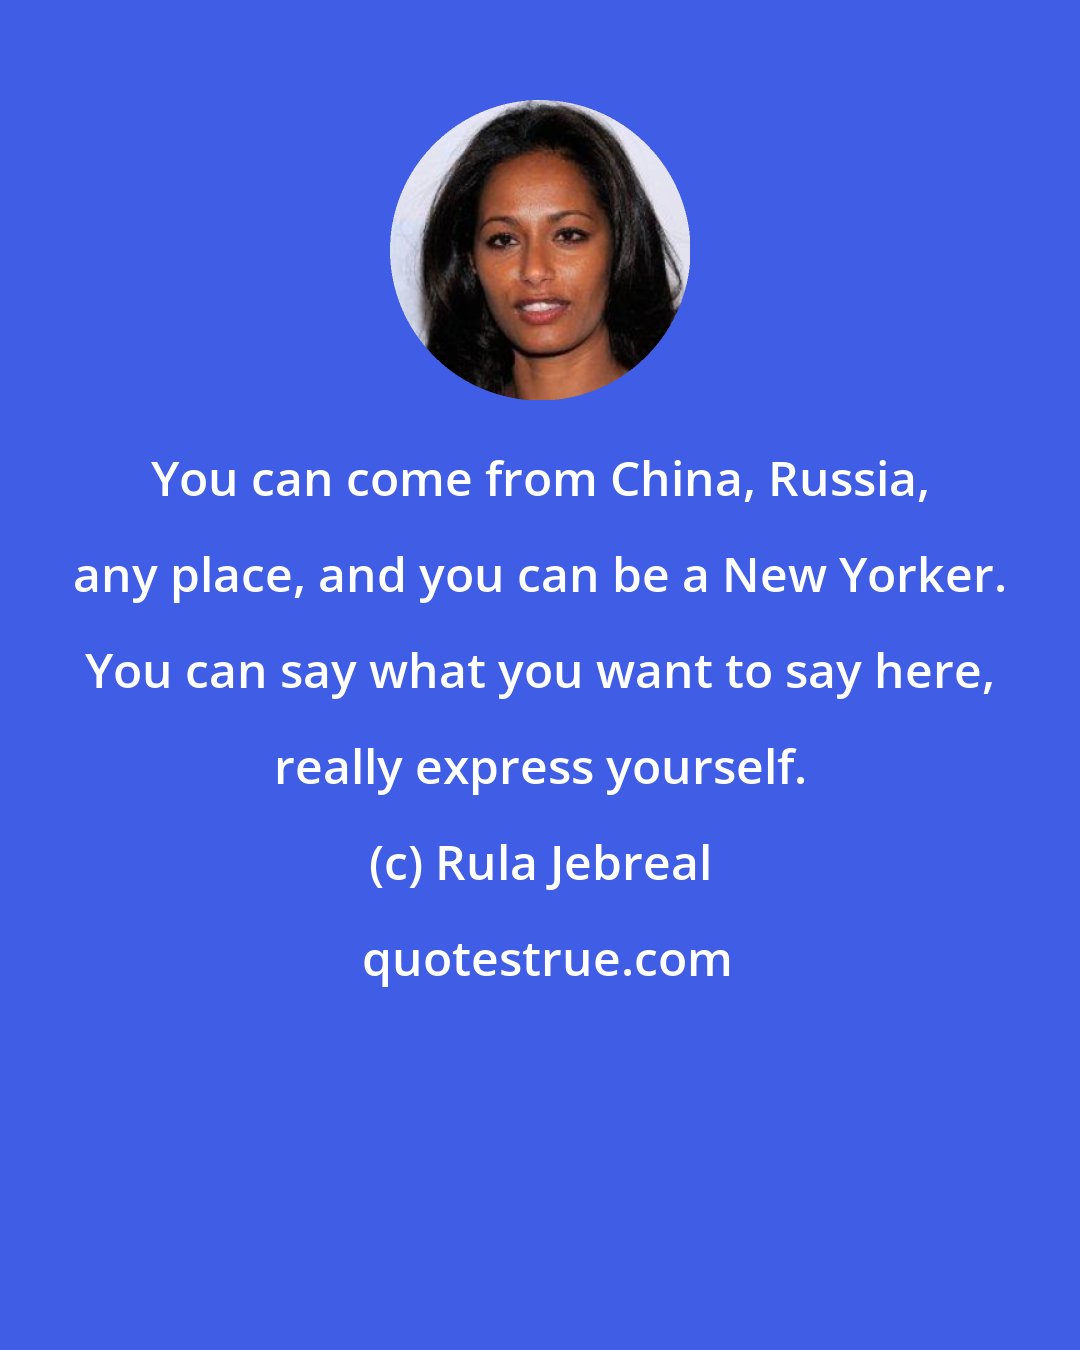 Rula Jebreal: You can come from China, Russia, any place, and you can be a New Yorker. You can say what you want to say here, really express yourself.